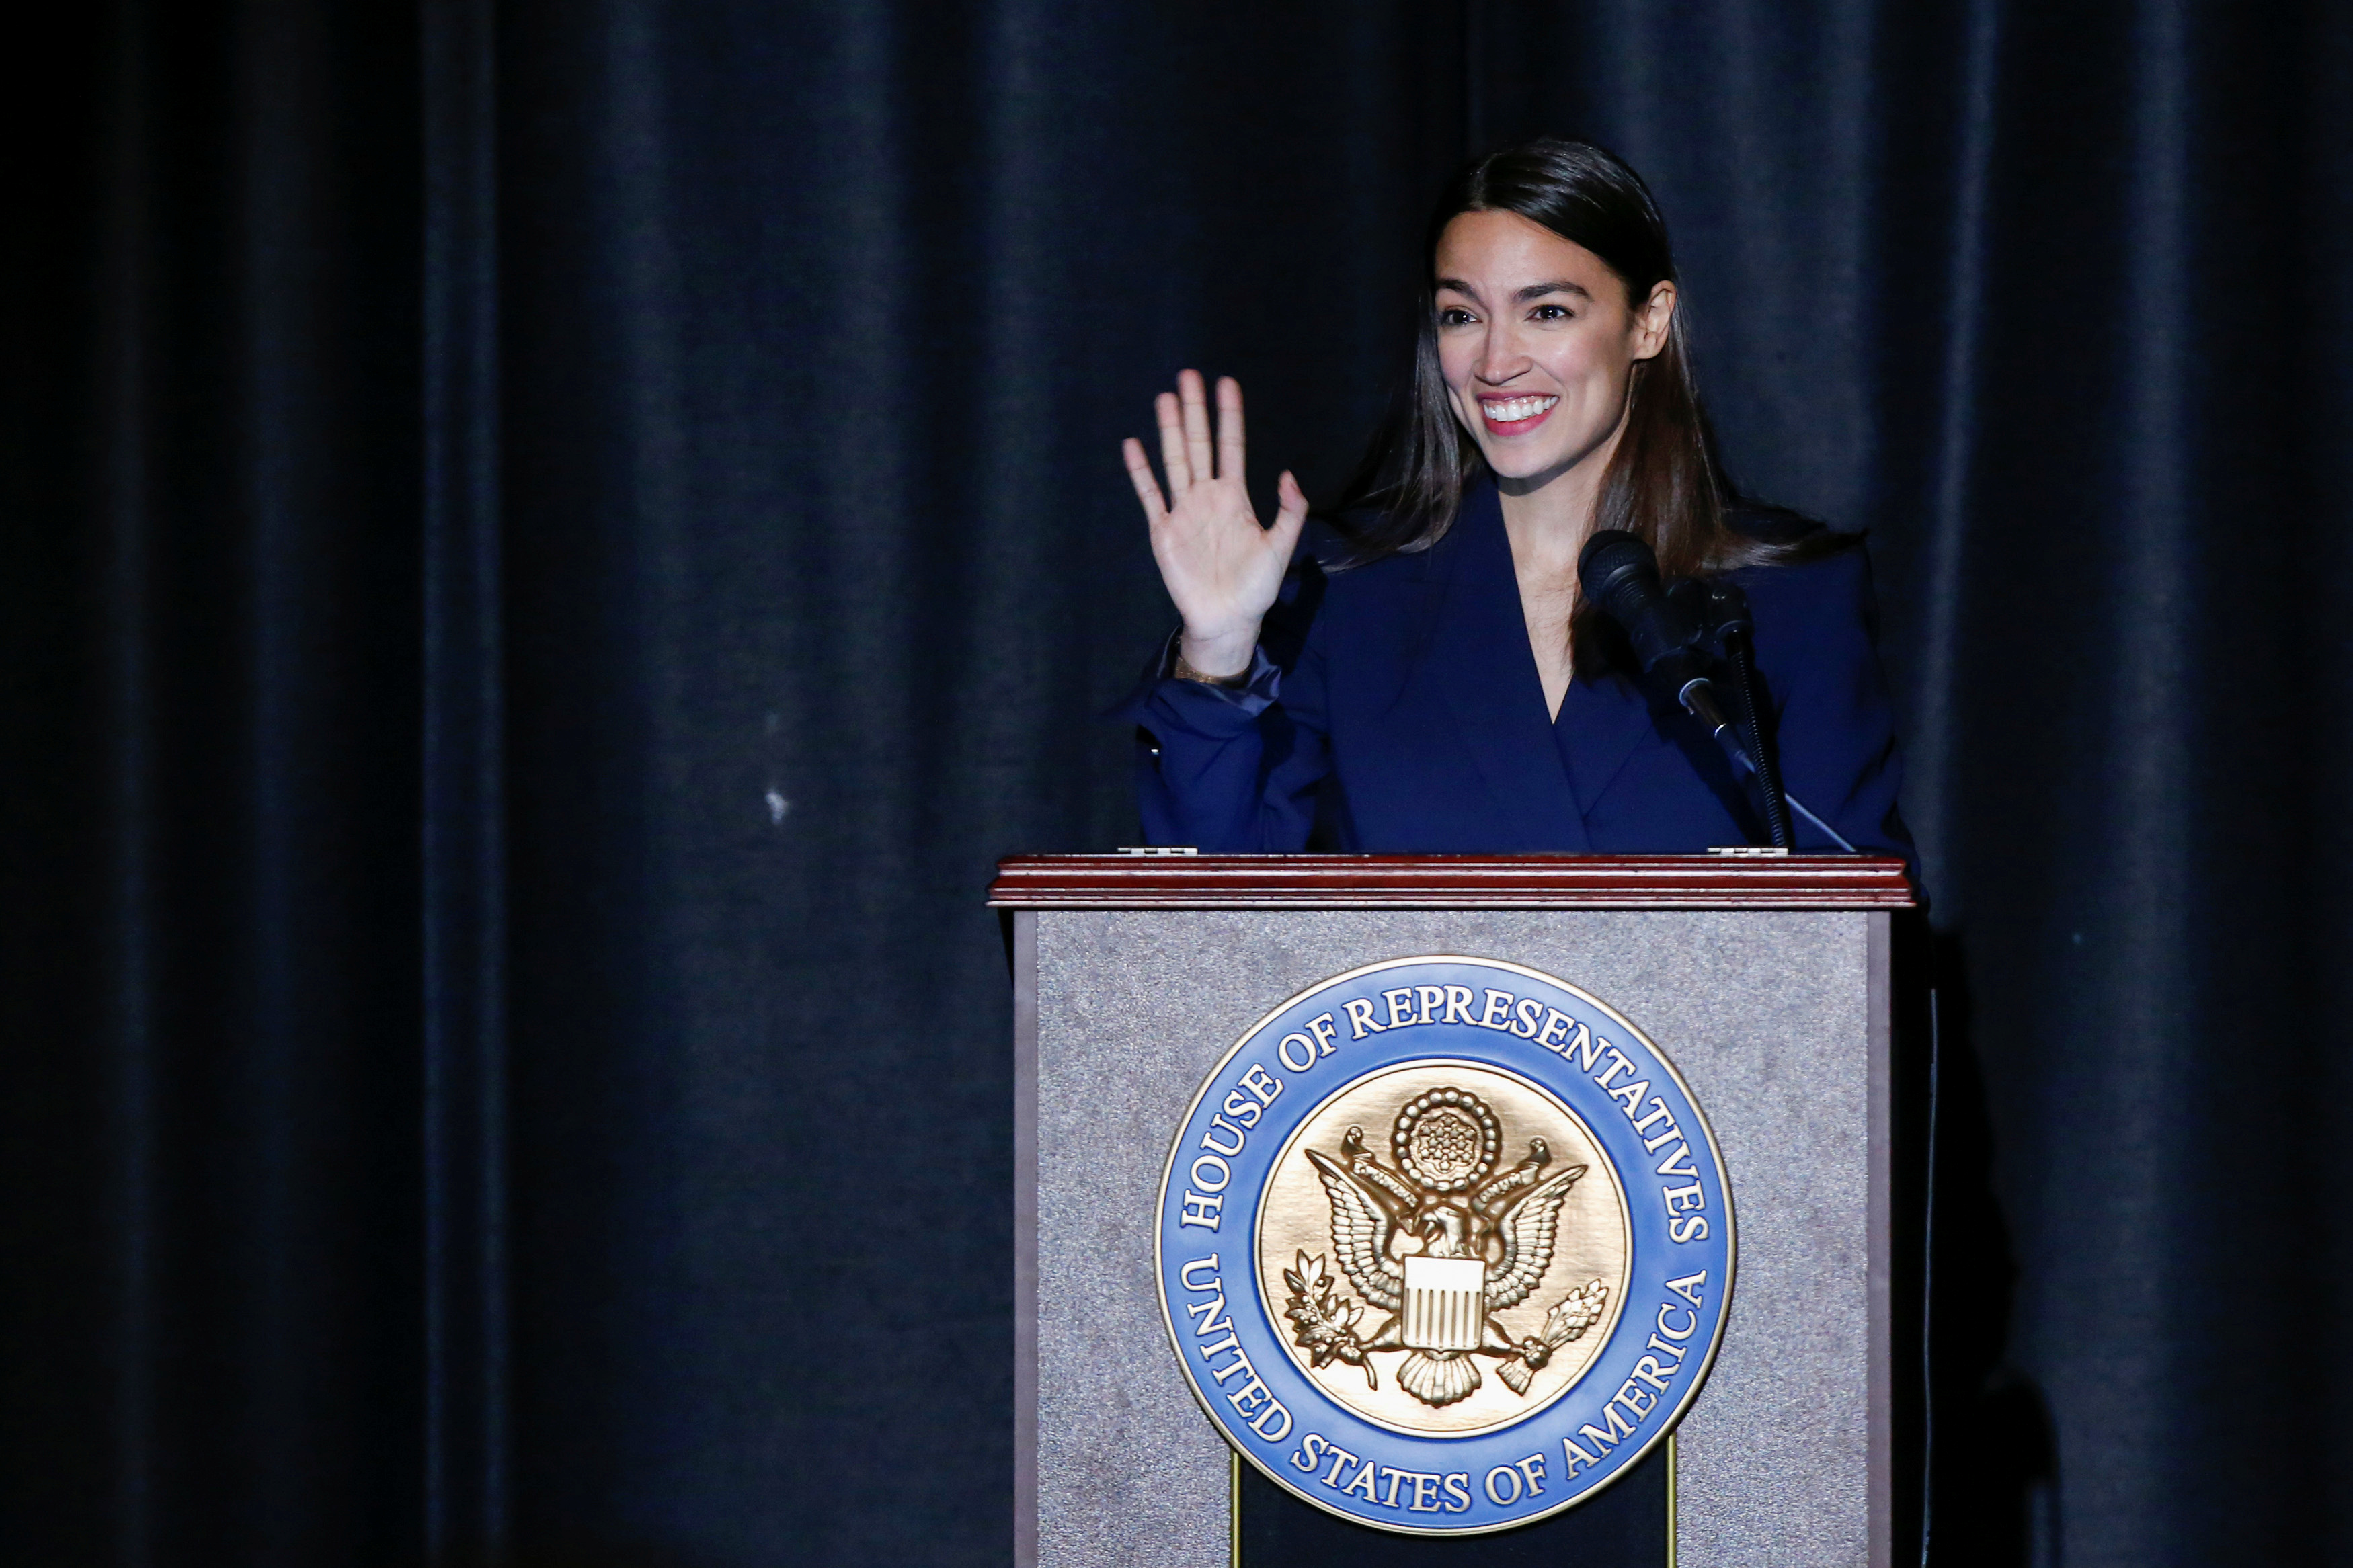 U.S. Rep. Ocasio-Cortez waves to attendees during her official swearing-in ceremony in the borough of Bronx, New York